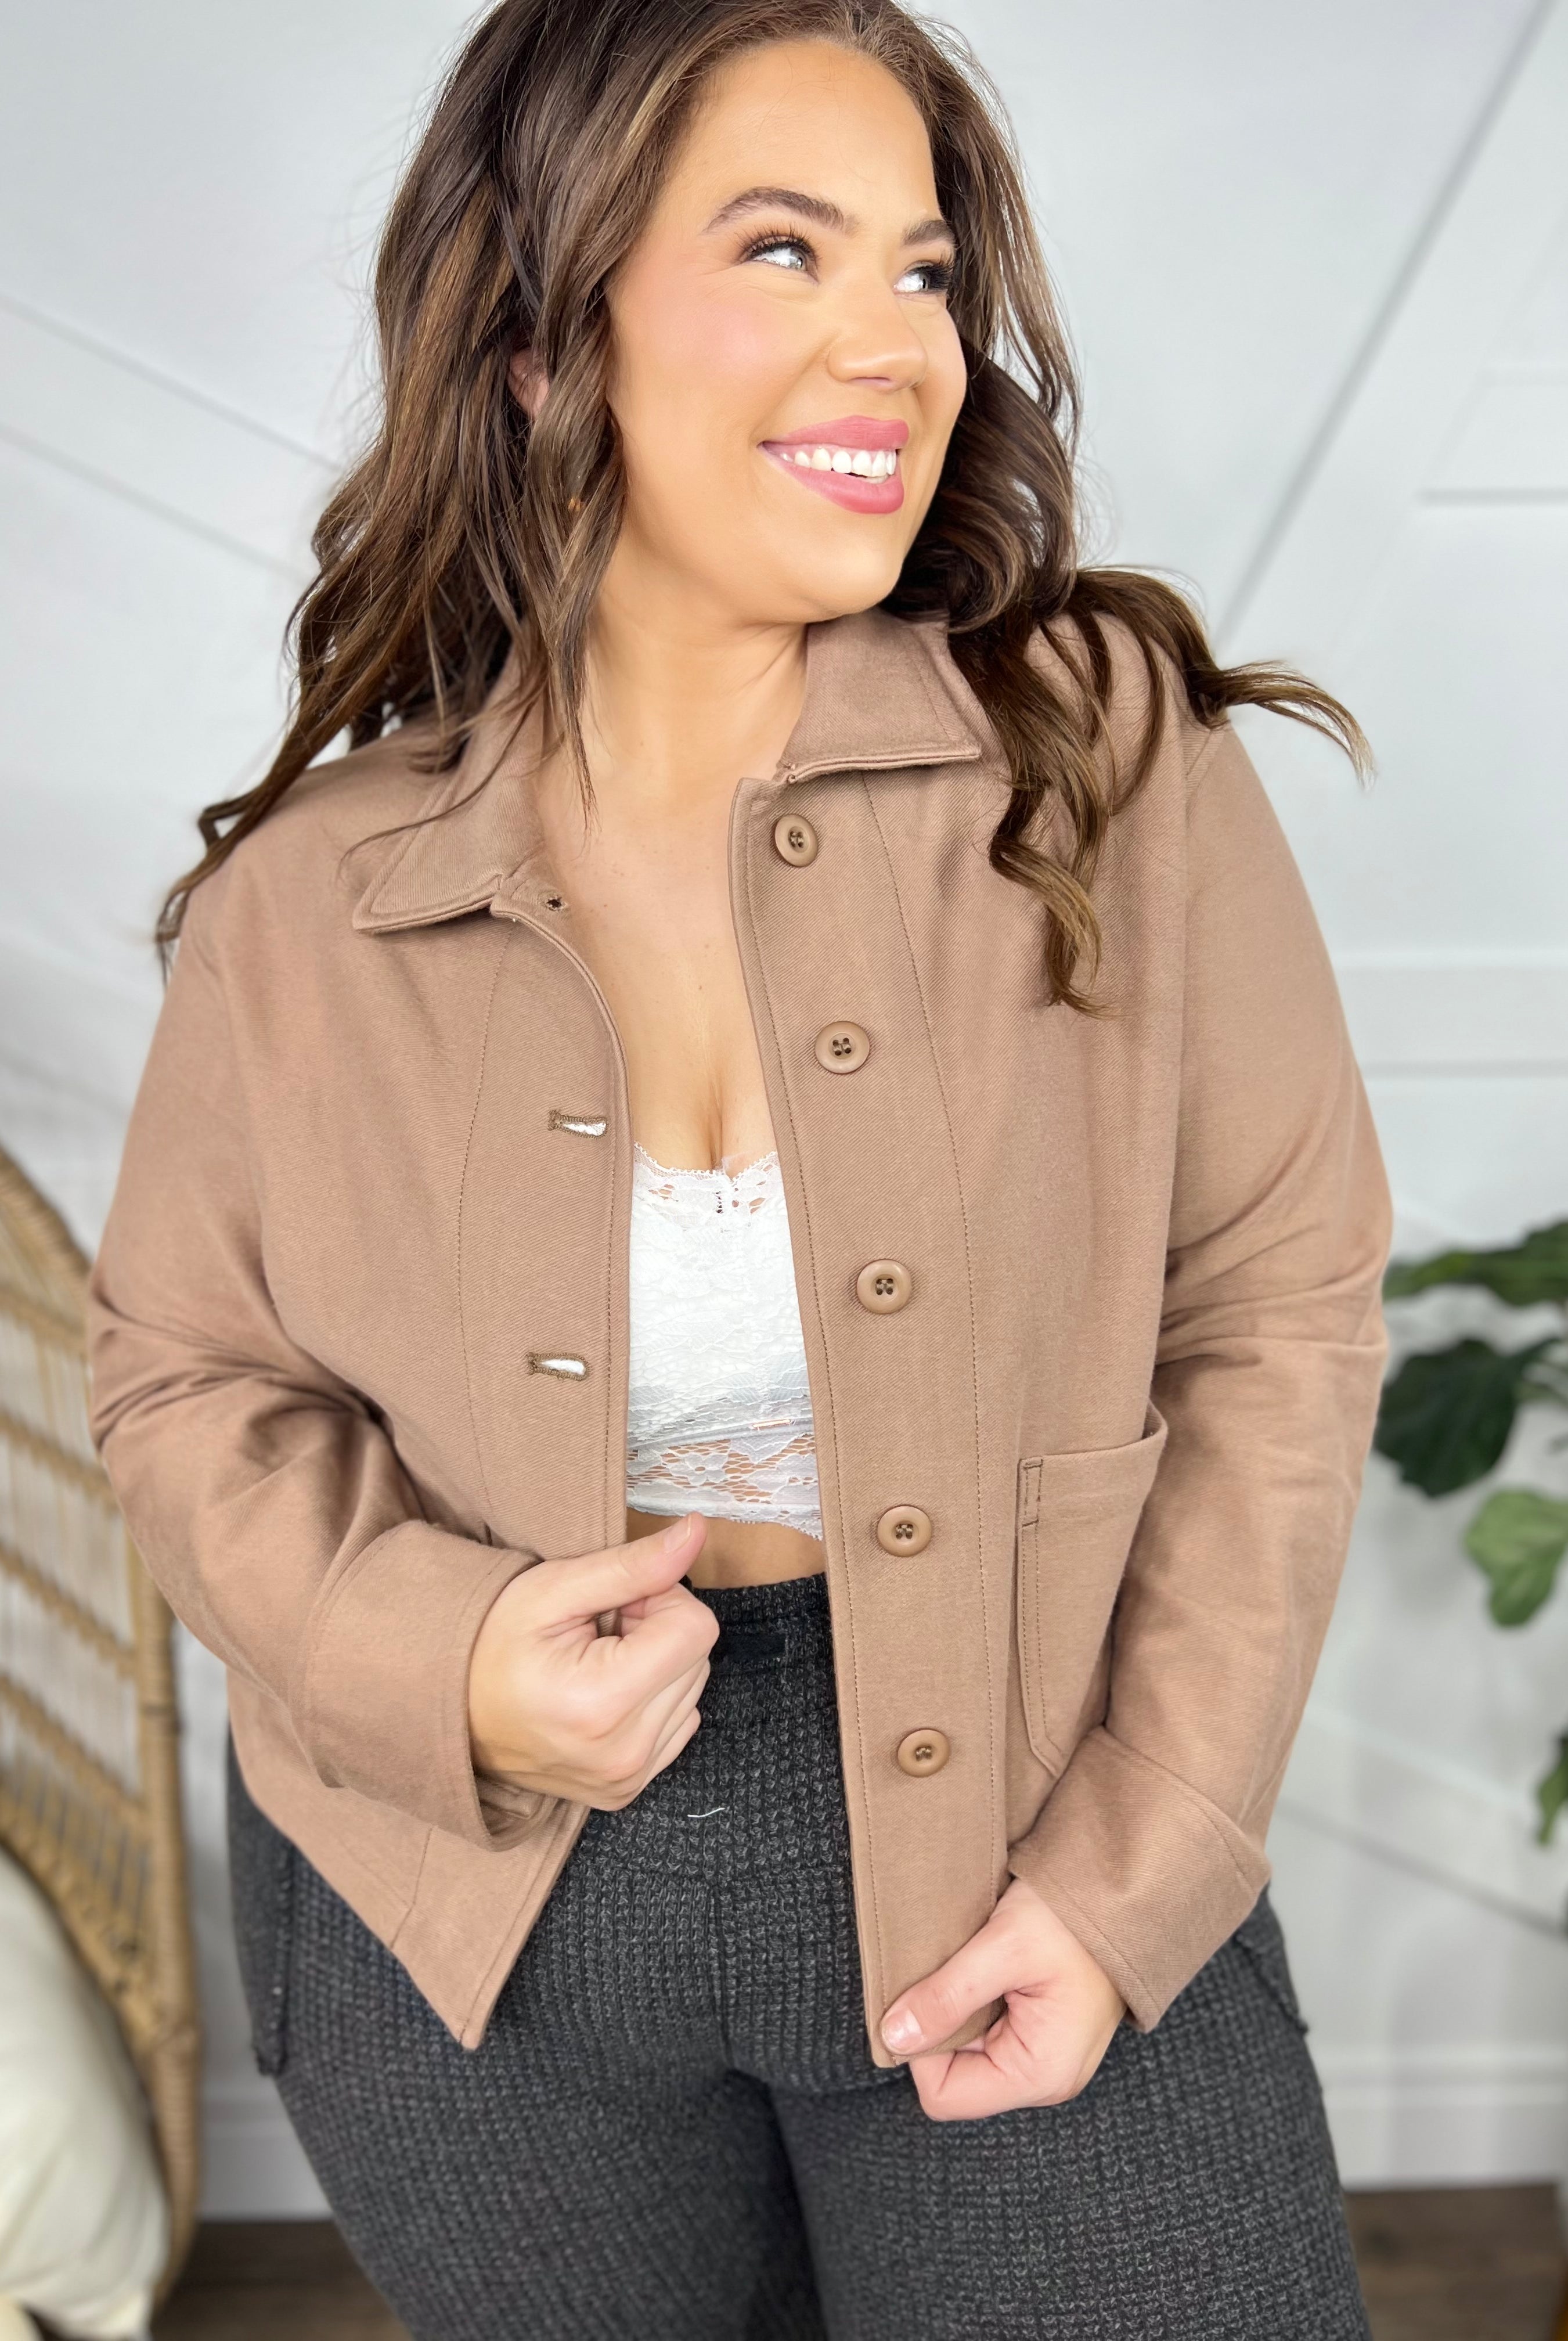 Sooner or Later Jacket-200 Jackets/Shackets-Rae Mode-Heathered Boho Boutique, Women's Fashion and Accessories in Palmetto, FL